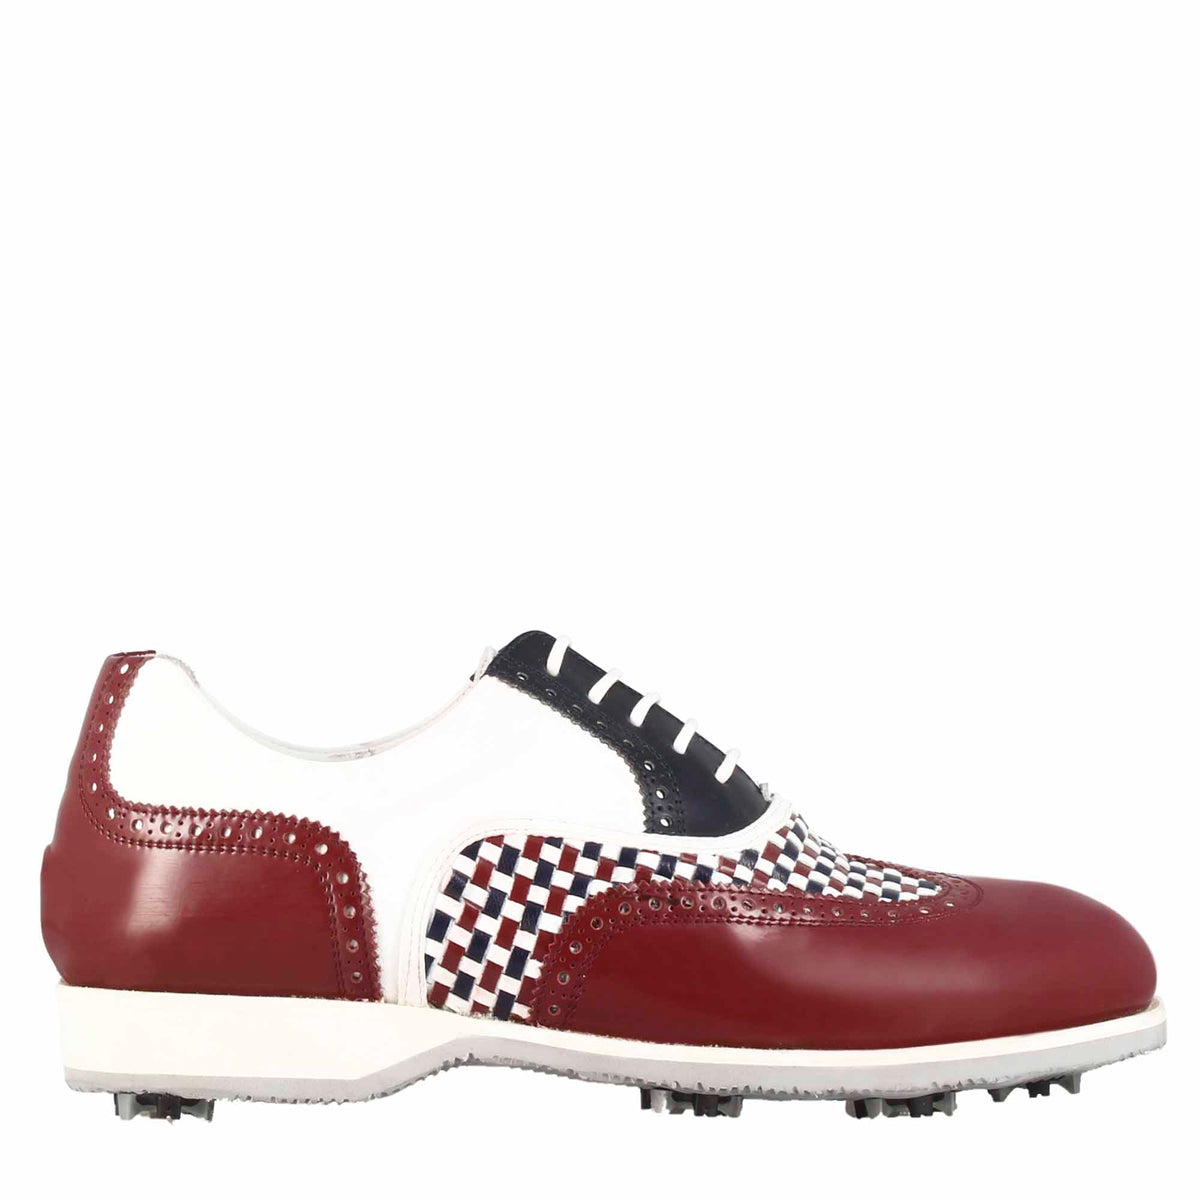 Handcrafted woman's golf shoes in white leather with blue and burgundy details